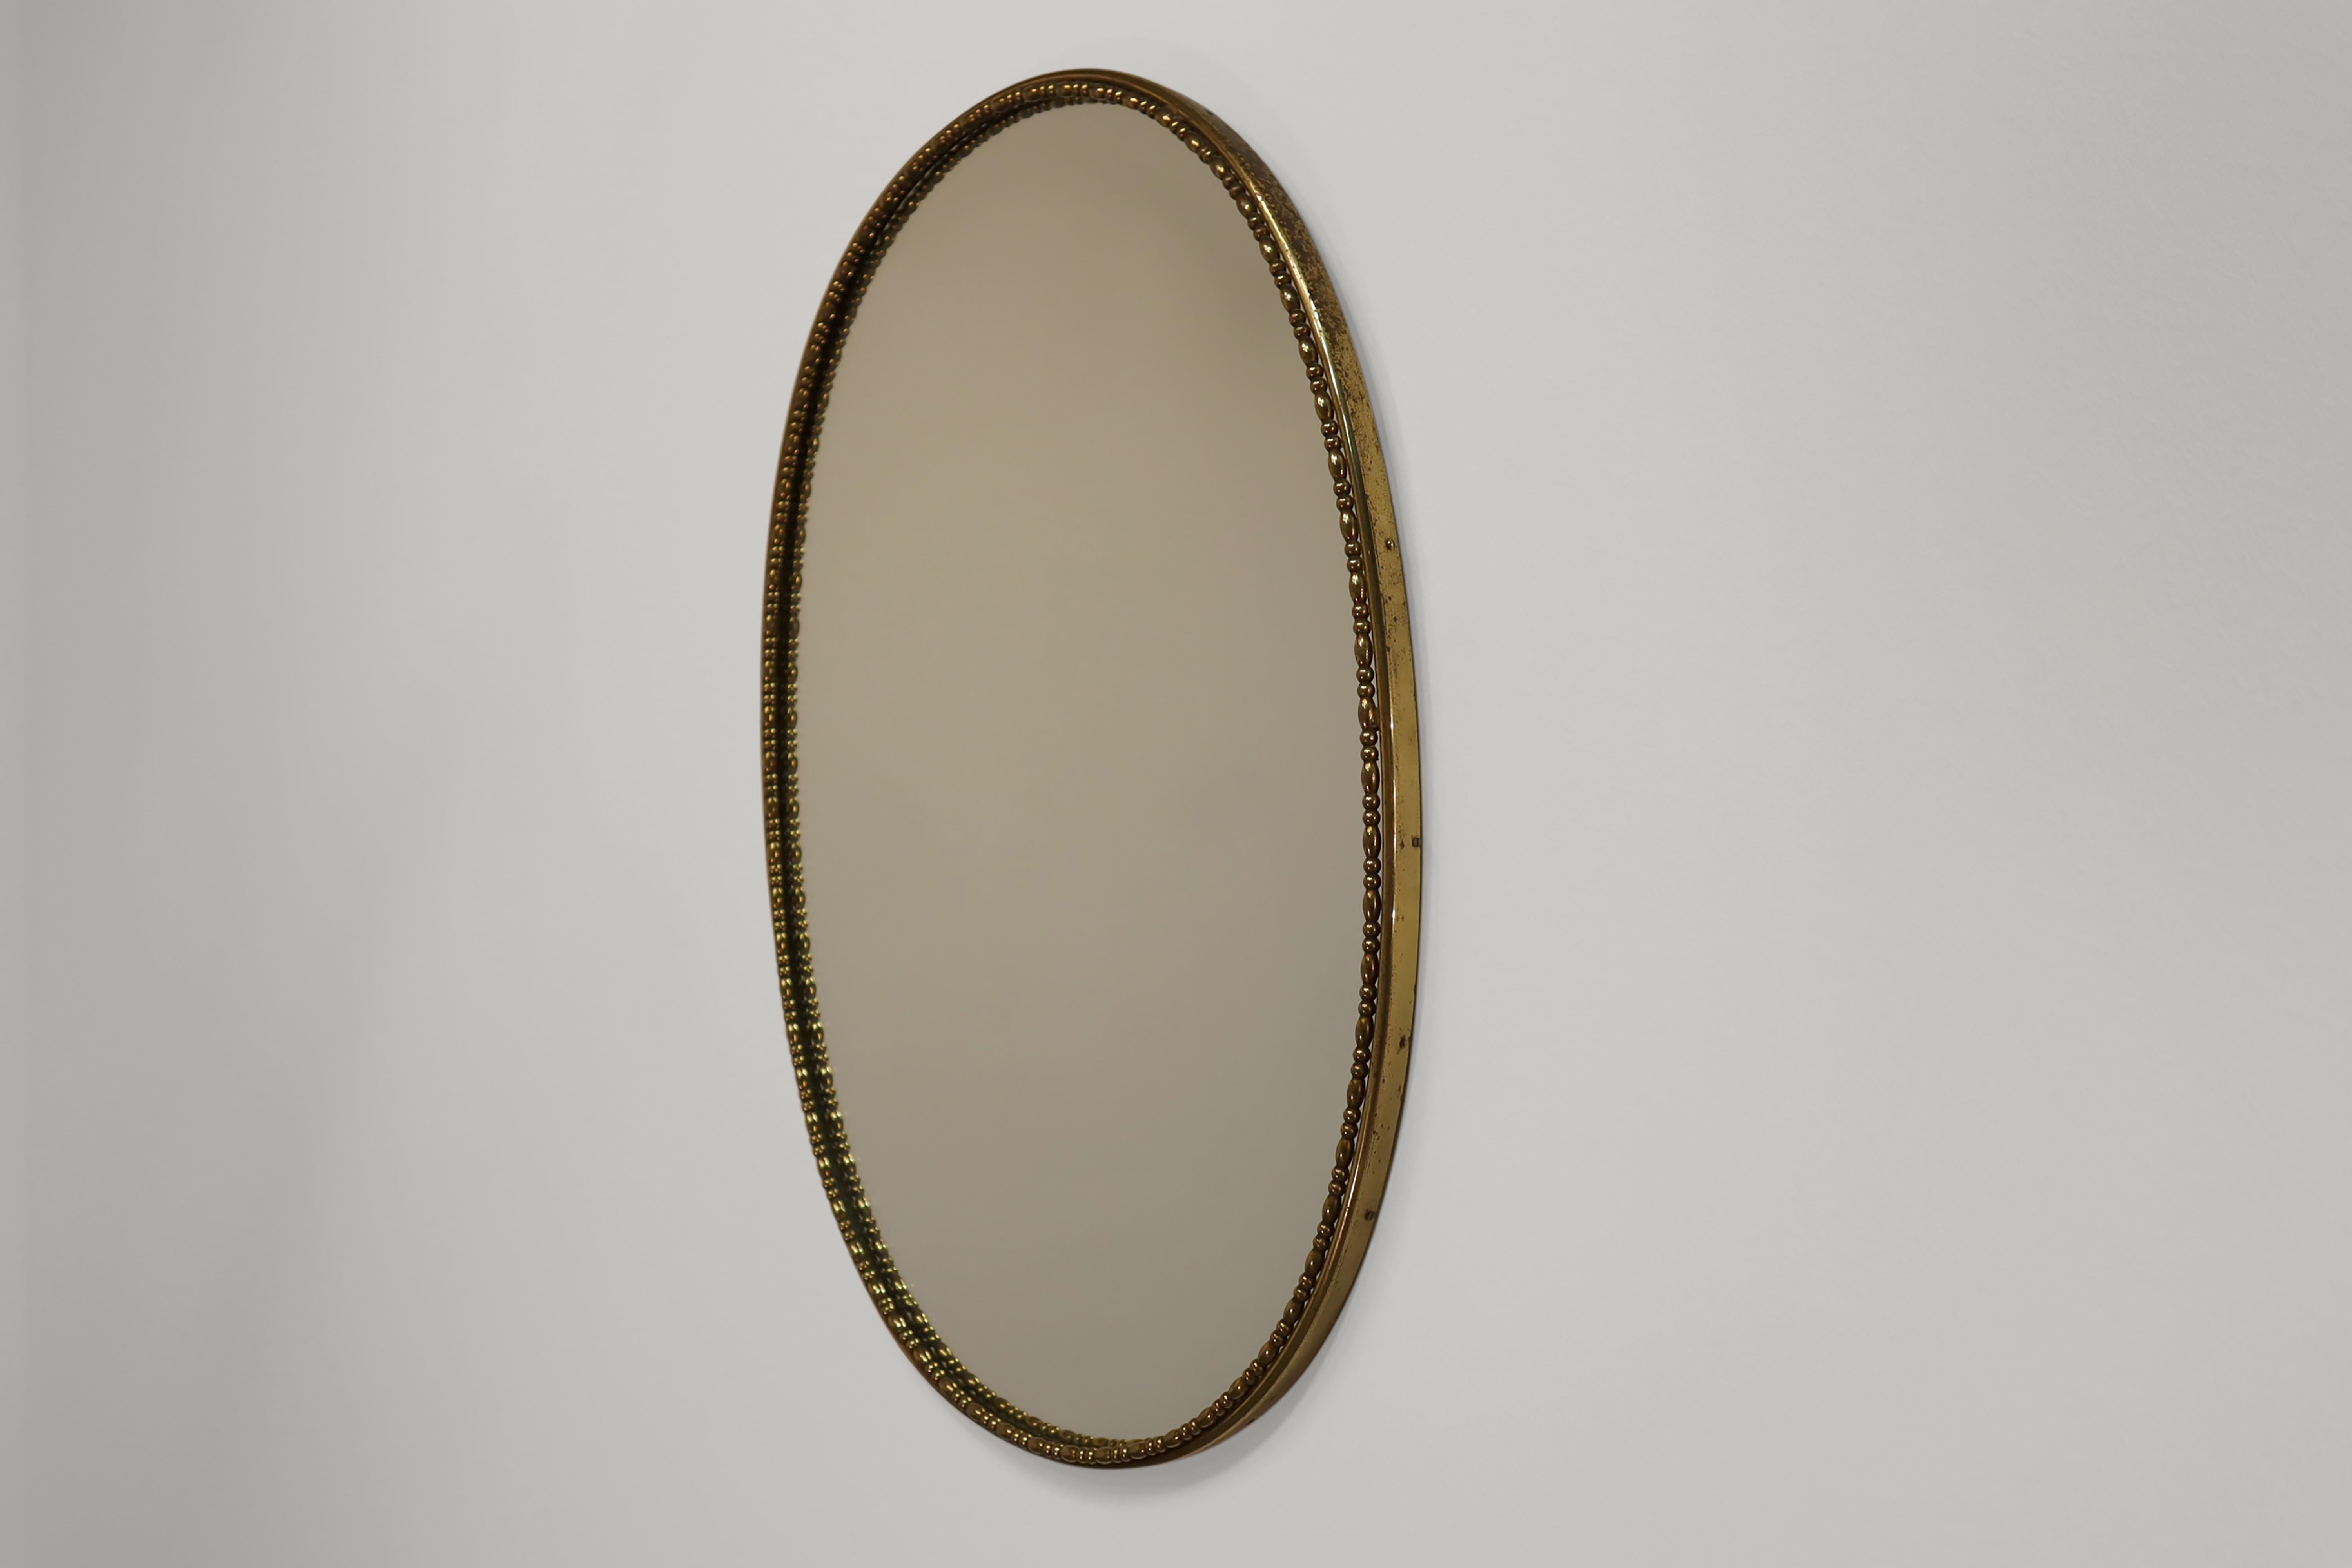 Mid-Century Modern oval-shaped wall mirror in patinated brass. Made in Italy in 1950s.

This mirror is constructed in wood, with a brass lip wrought around the perimeter and holding the mirror in place. Brass screws fix the brass lip to the wood